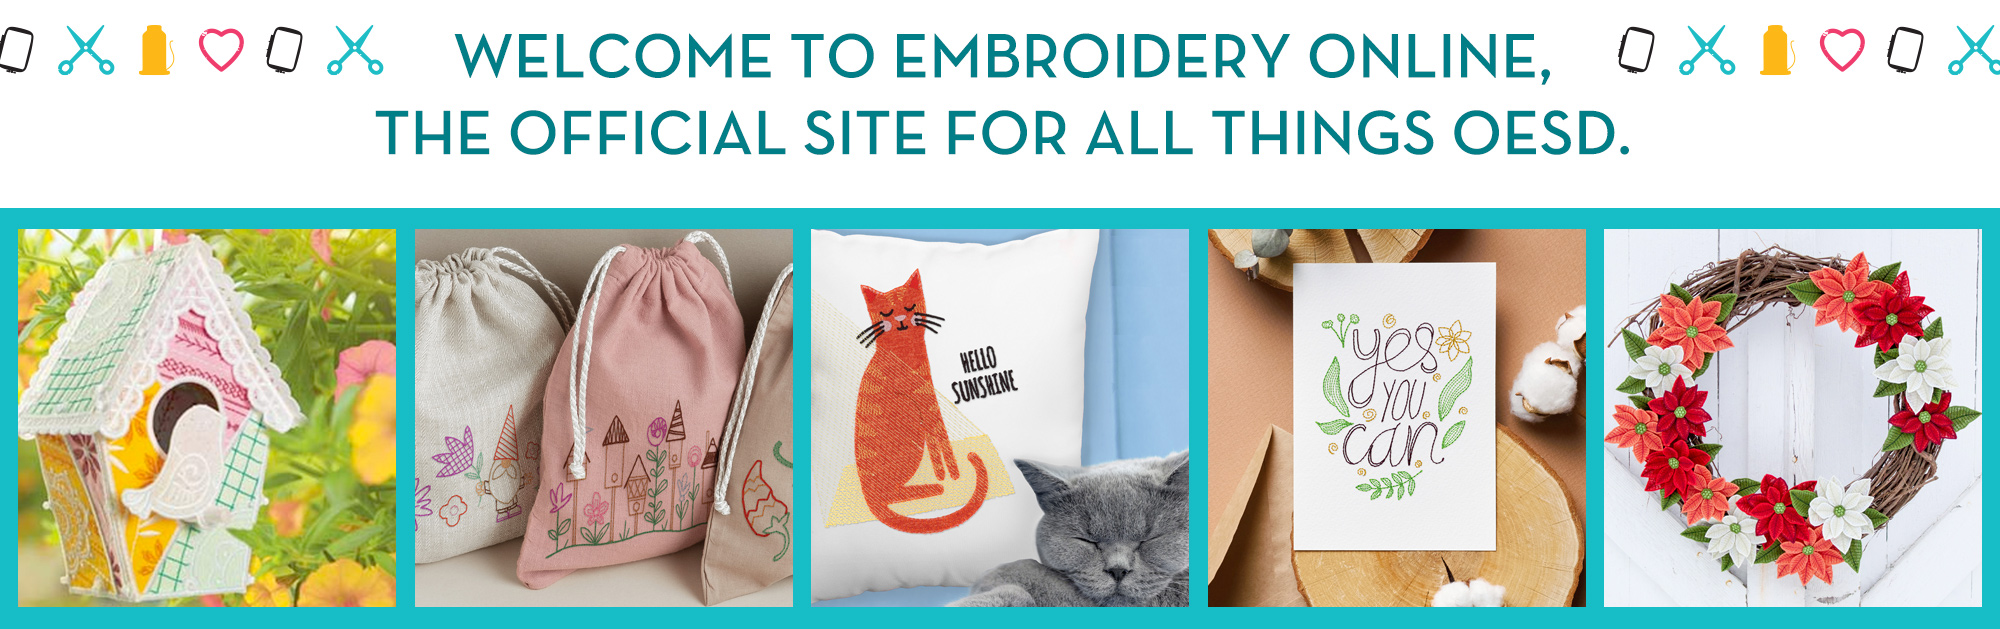 Welcome to Embroidery